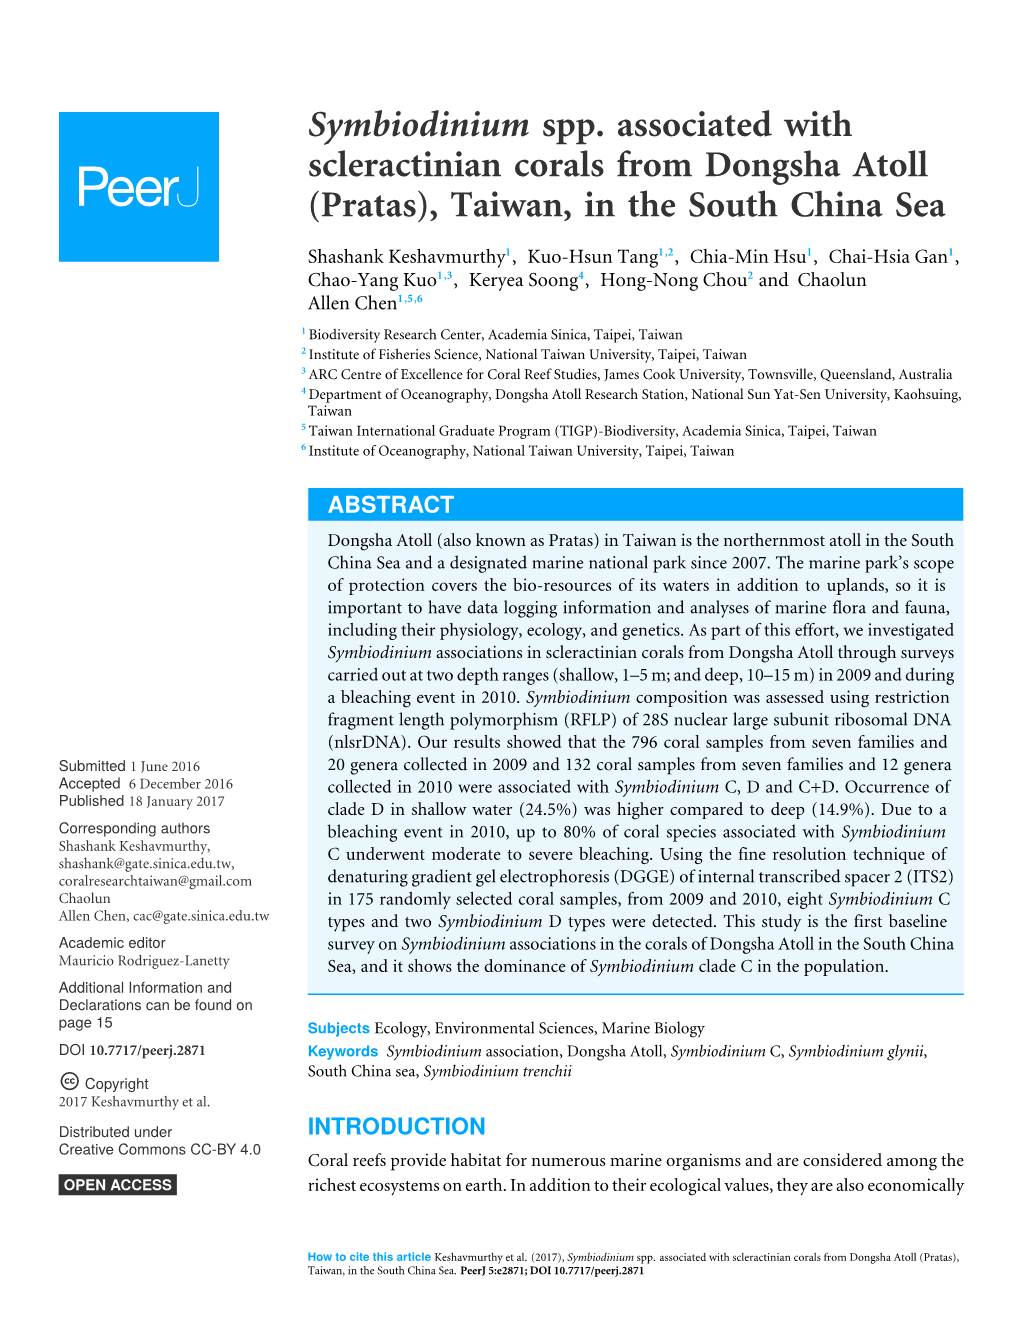 Symbiodinium Spp. Associated with Scleractinian Corals from Dongsha Atoll (Pratas), Taiwan, in the South China Sea